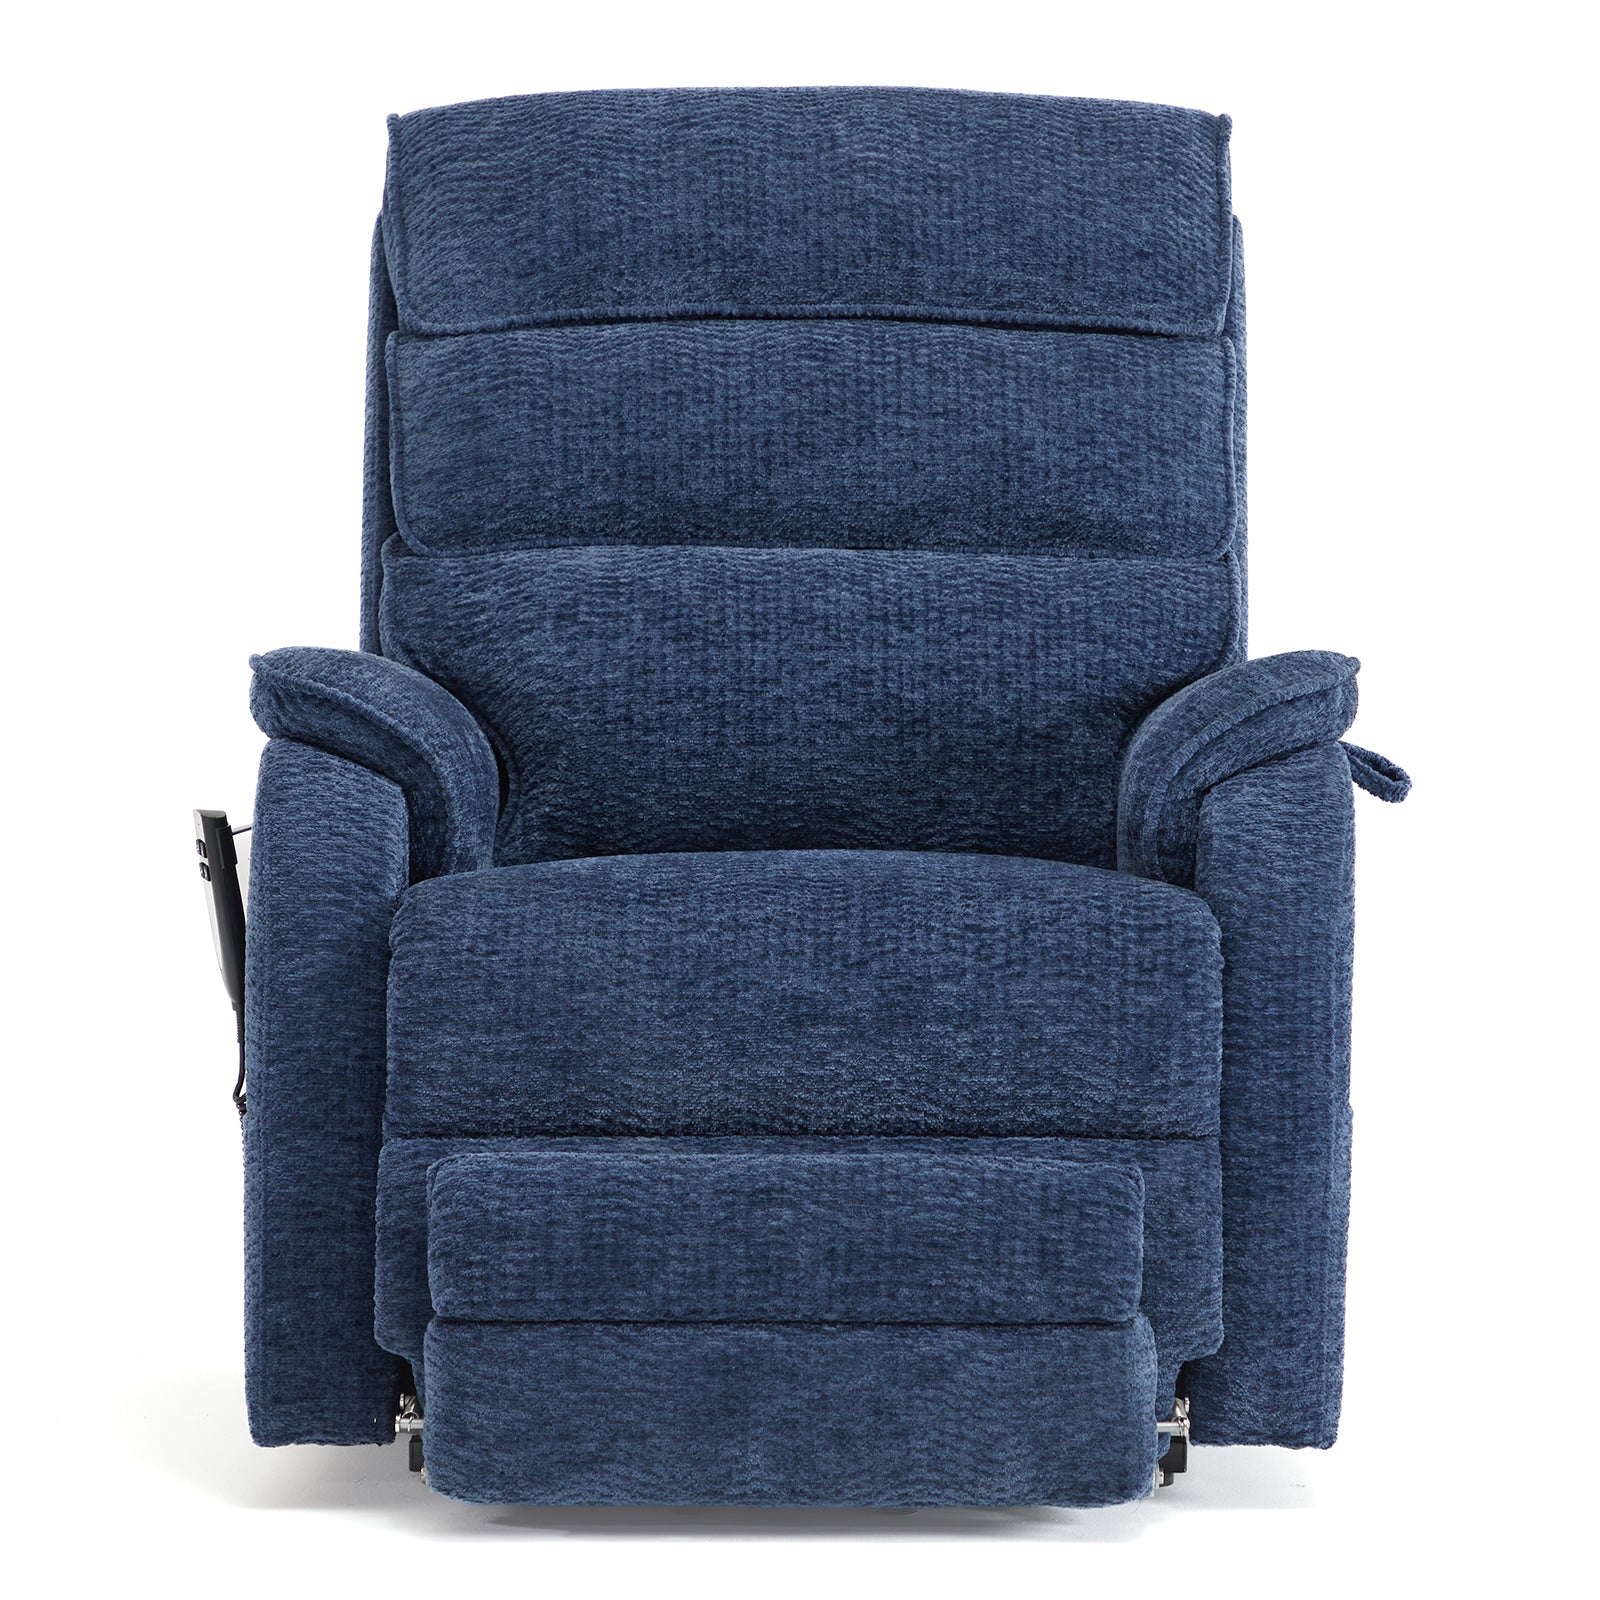 Best Recliner For Tall Woman With Heat And Massage